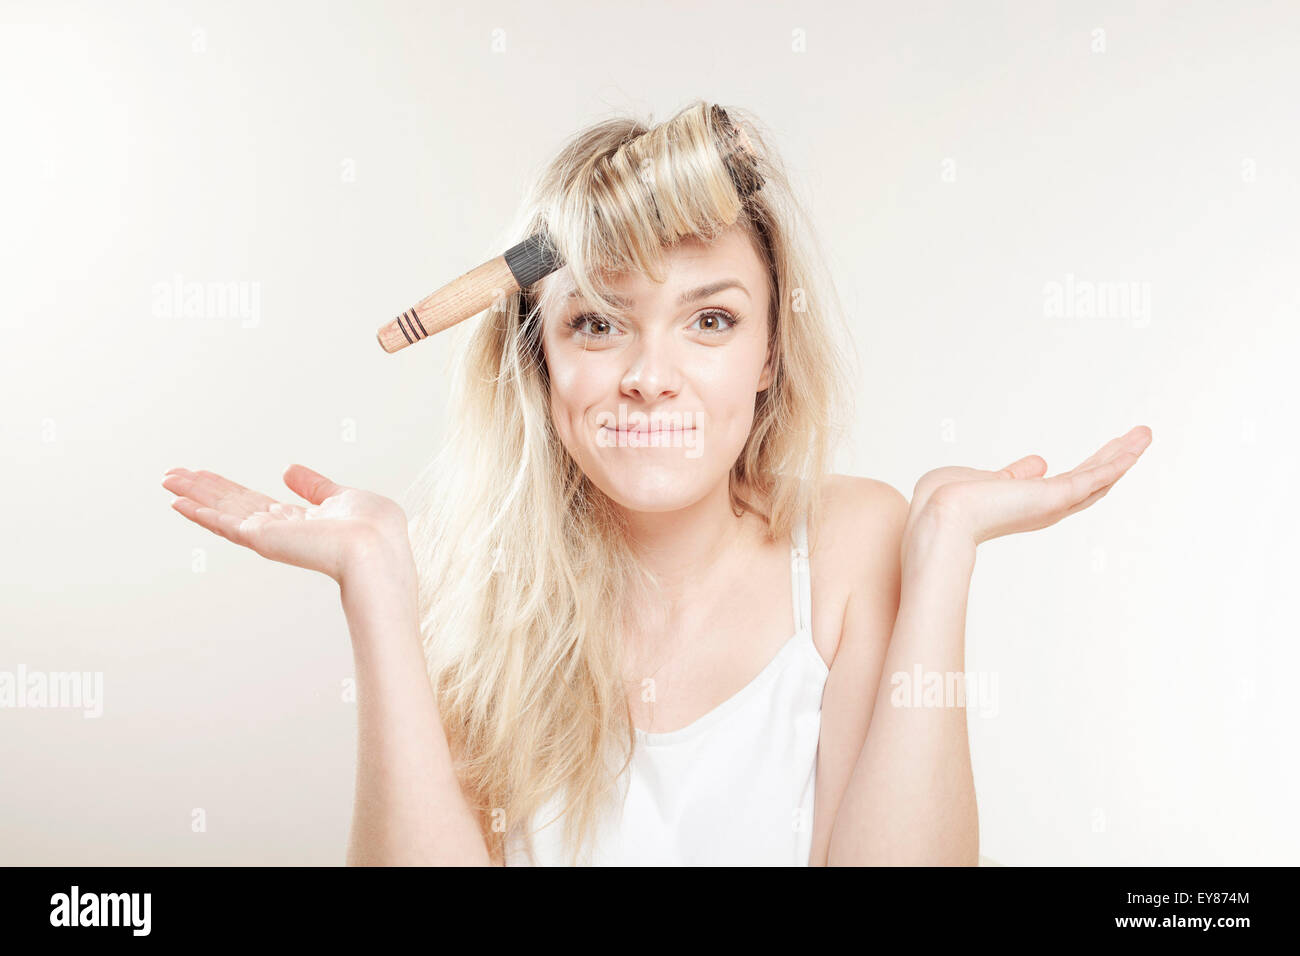 Young woman with hairbrush fooling around Stock Photo